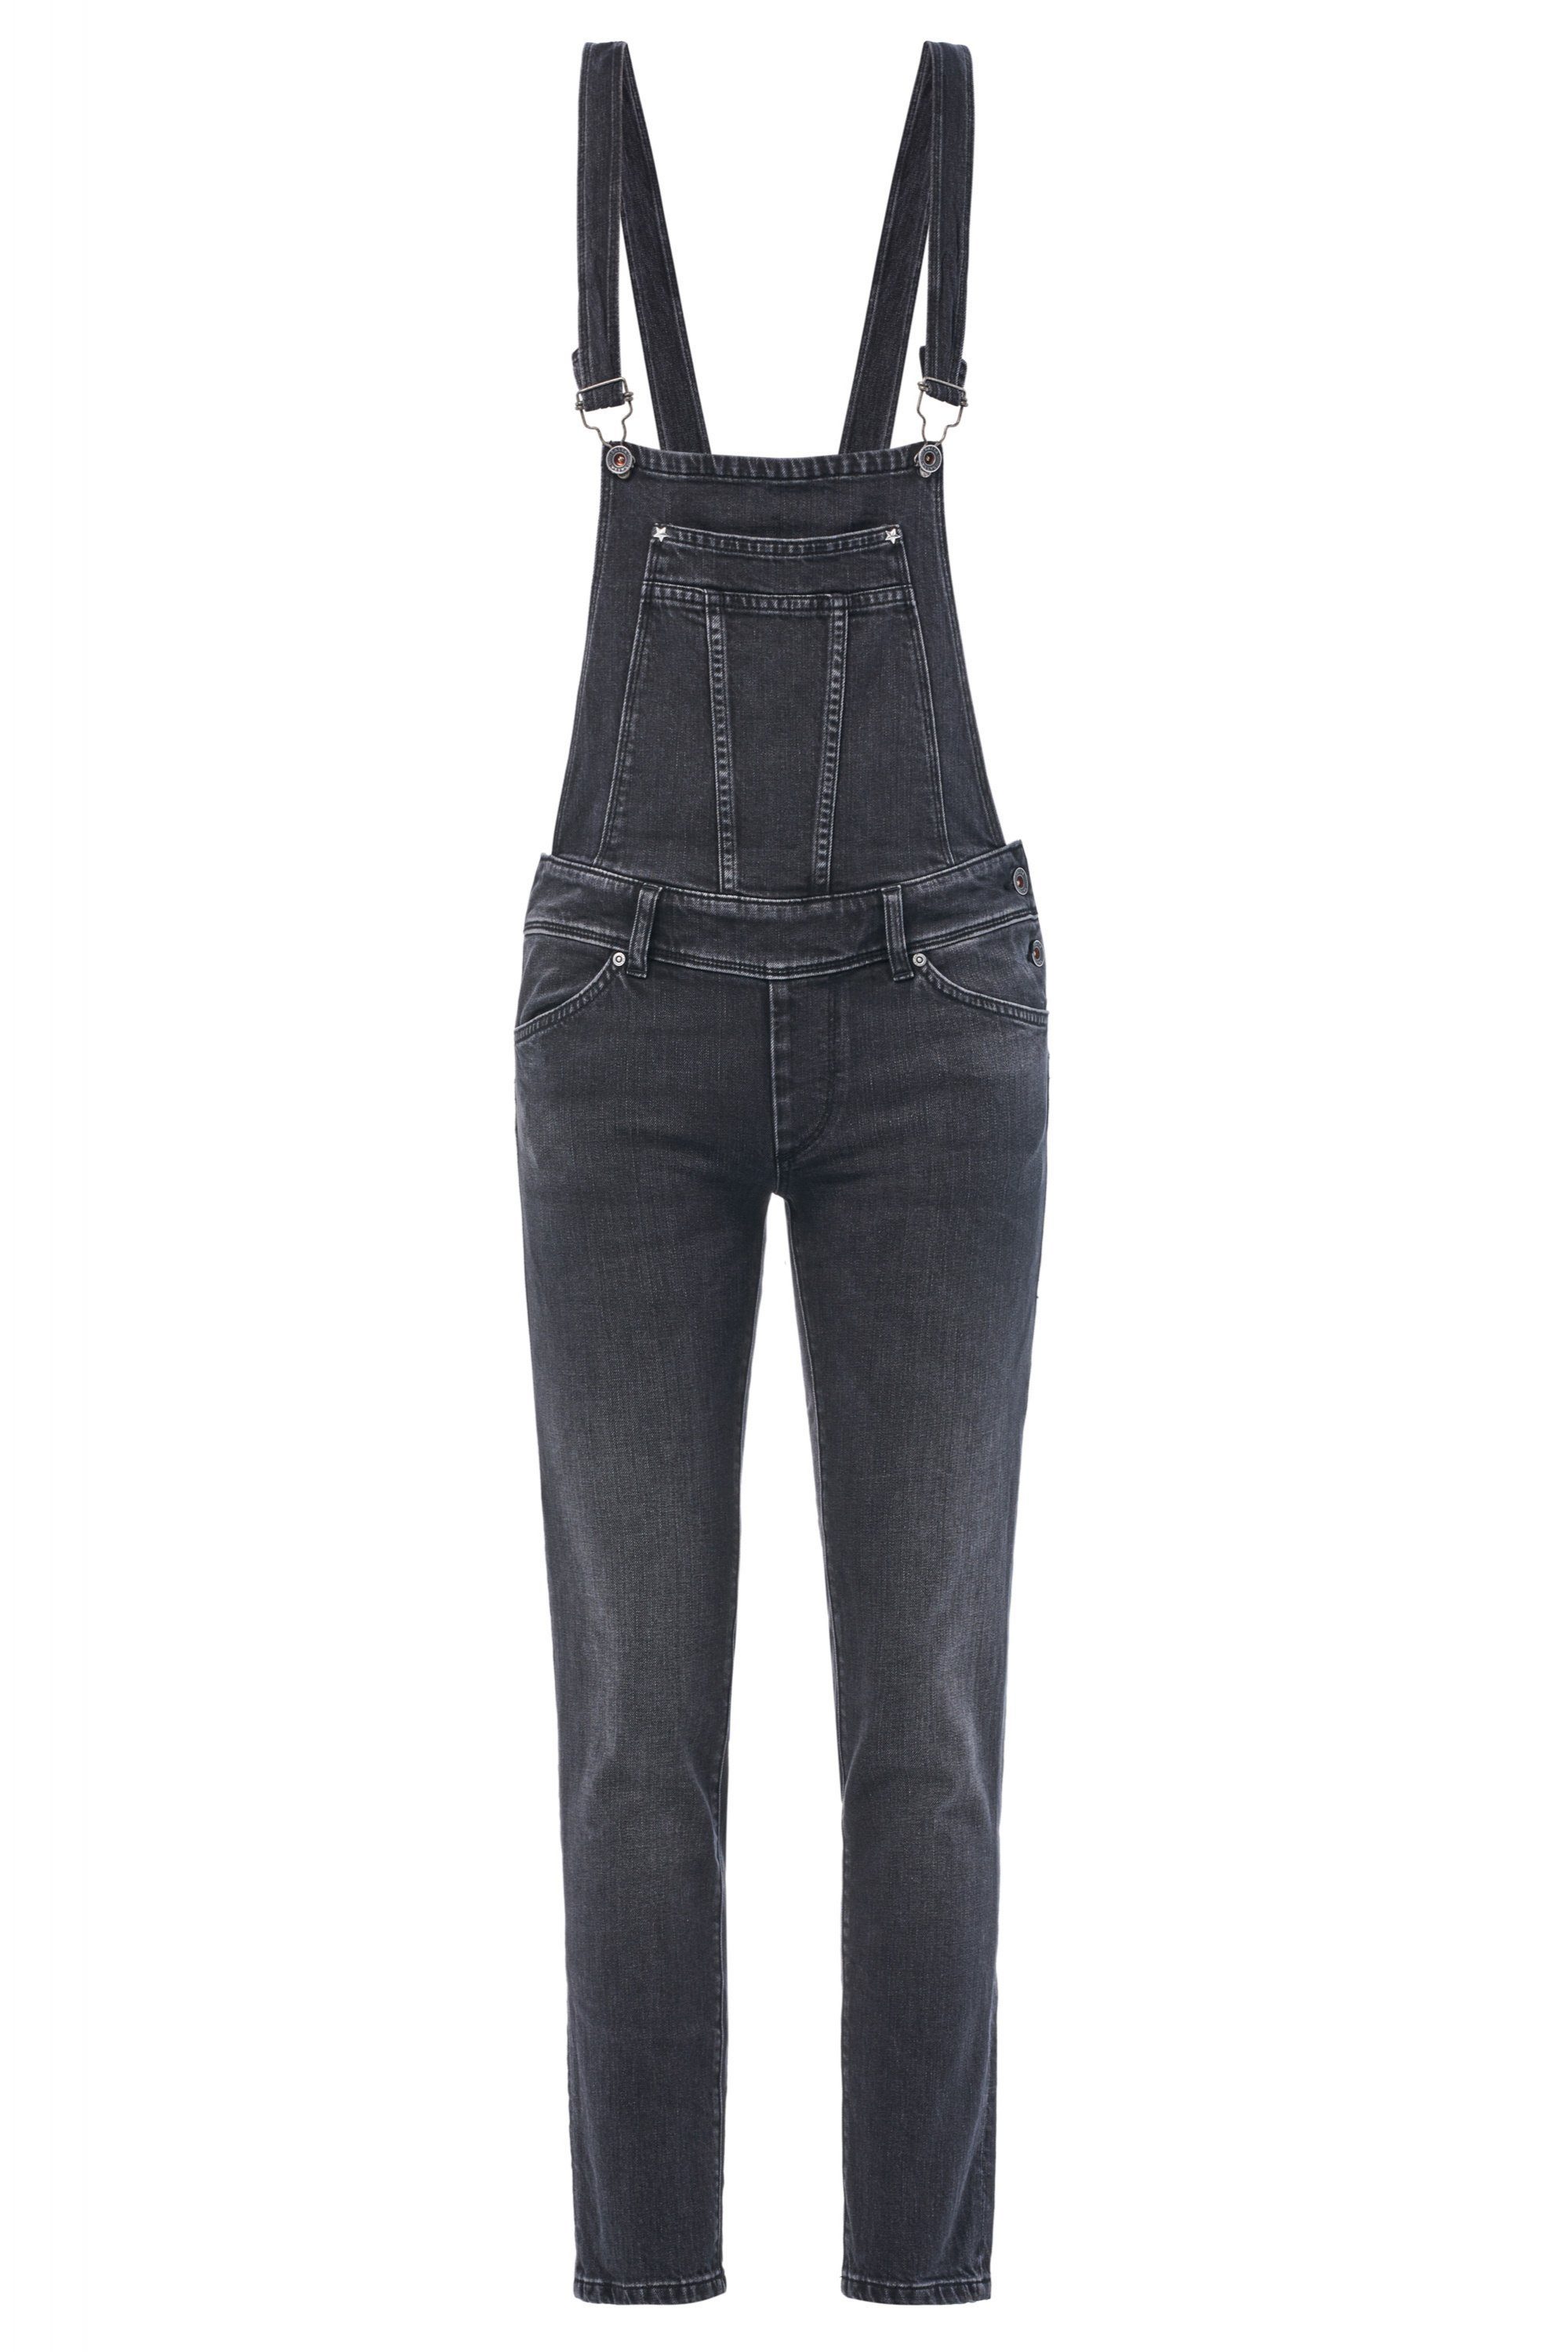 SALSA OVERALL washed JEANS 123892.0000 Salsa grey Stretch-Jeans WONDER out UP CAPRI PUSH